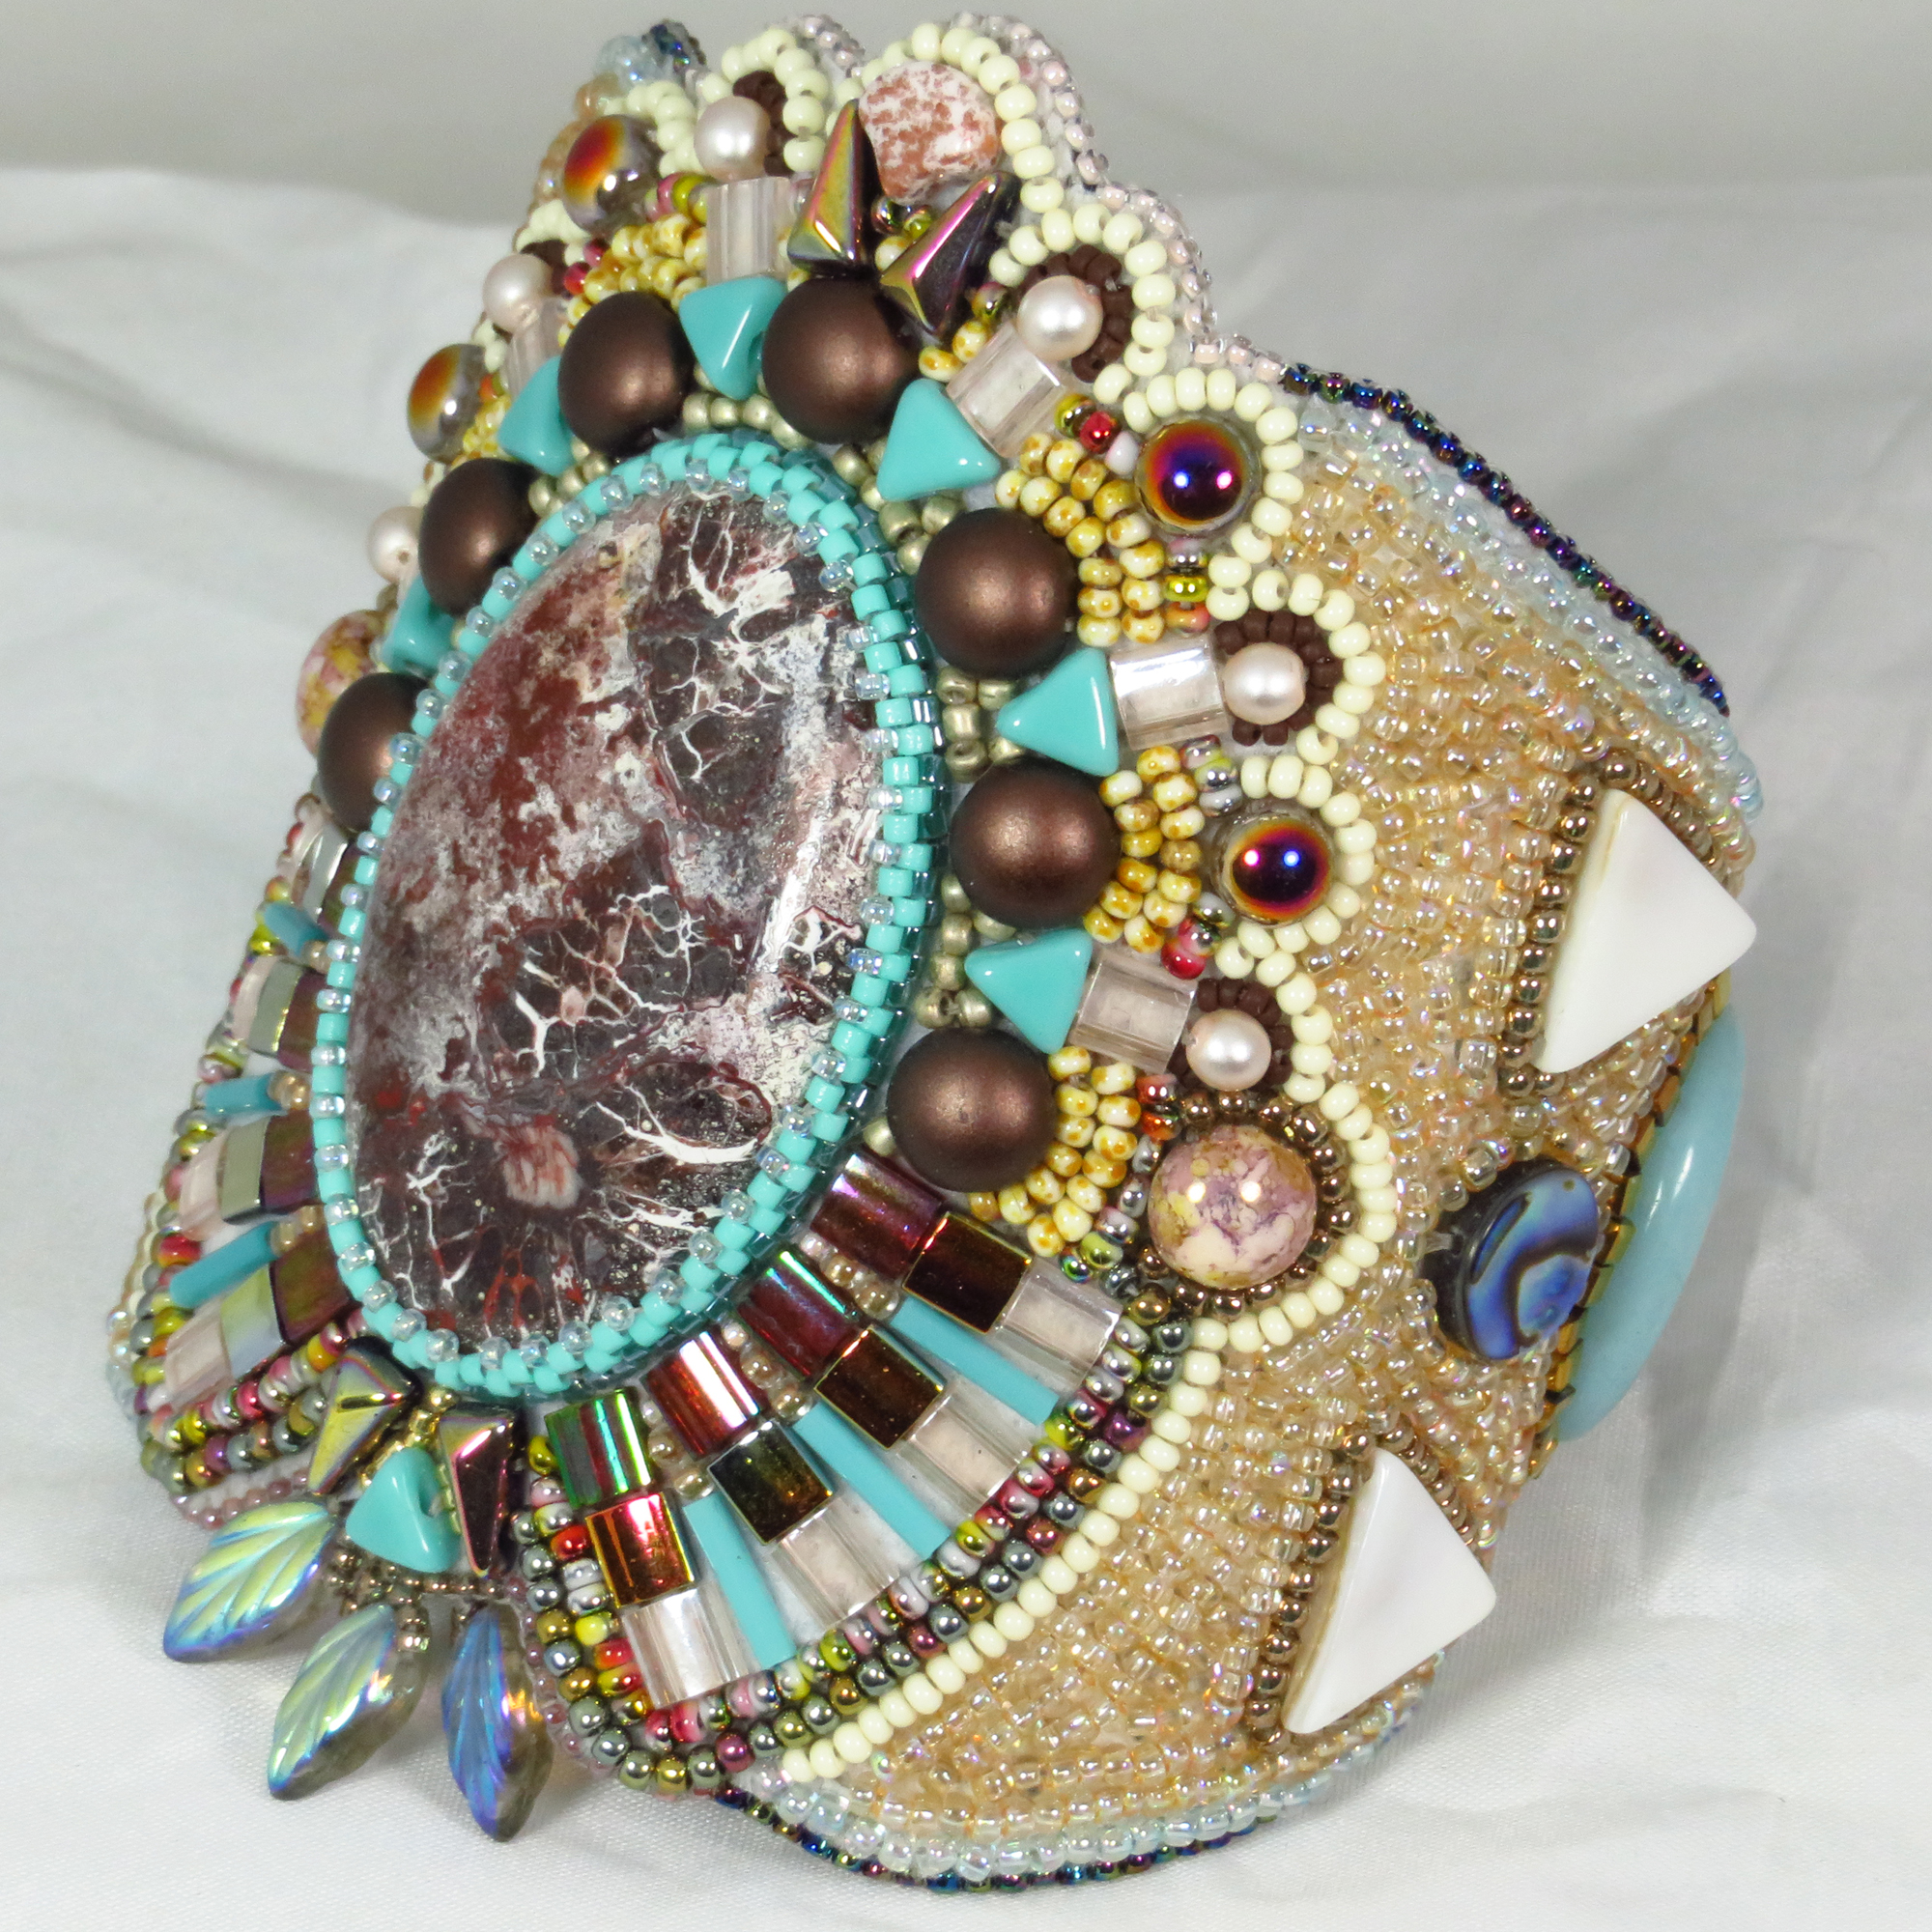 Agate, abalone and mother of pearl bead embroidered cuff bracelet by Bonnie Van Hall